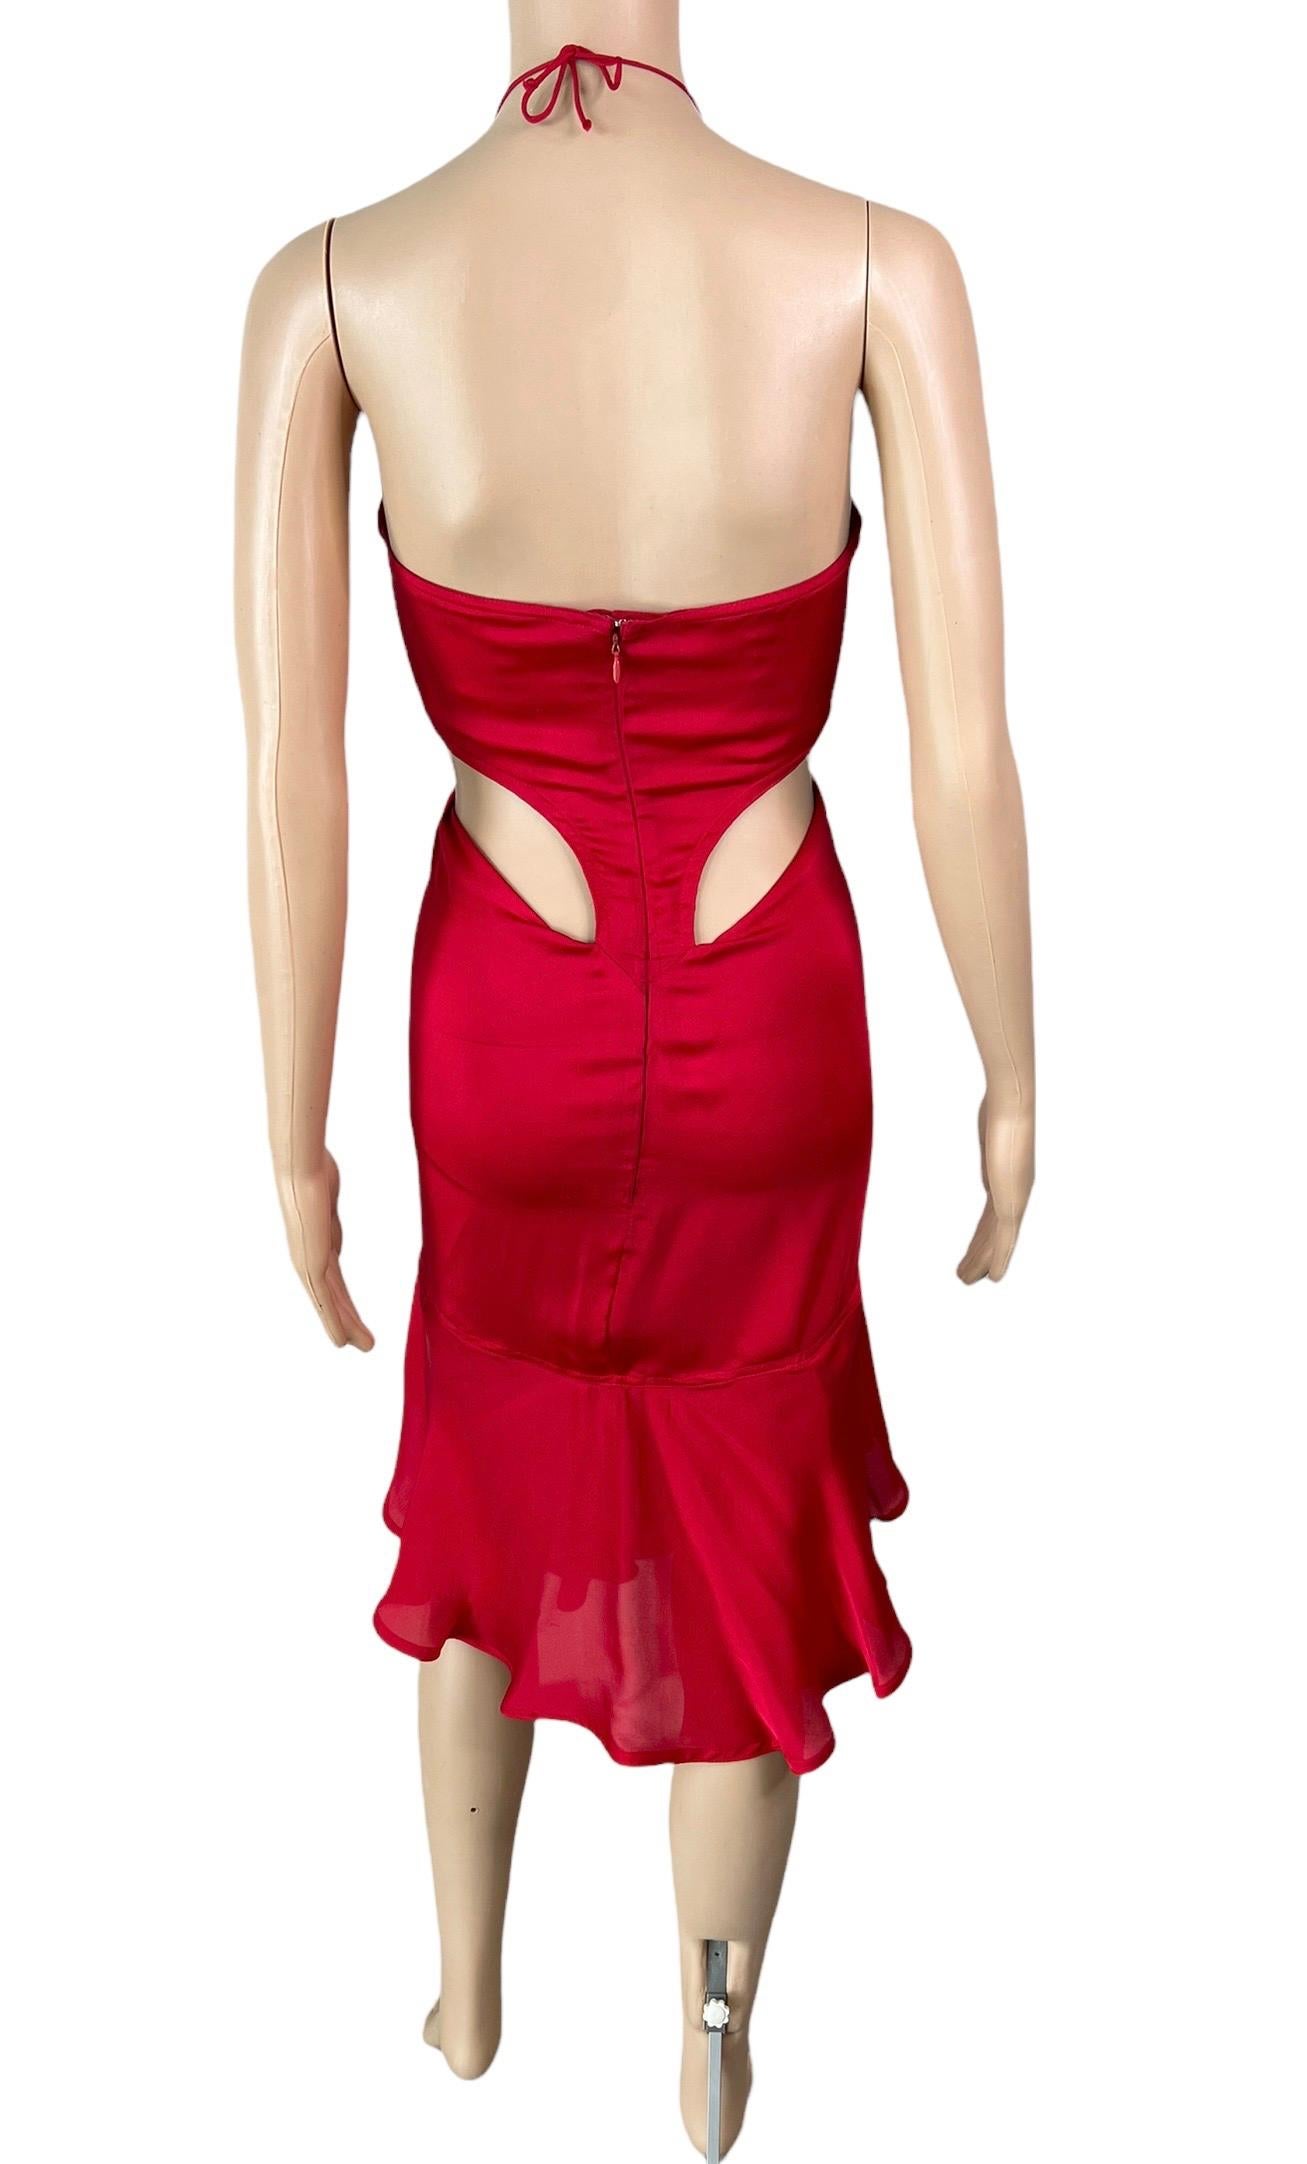 Women's Tom Ford for Yves Saint Laurent  F/W 2003 Runway Ruffled Cutout Bra Red Dress  For Sale